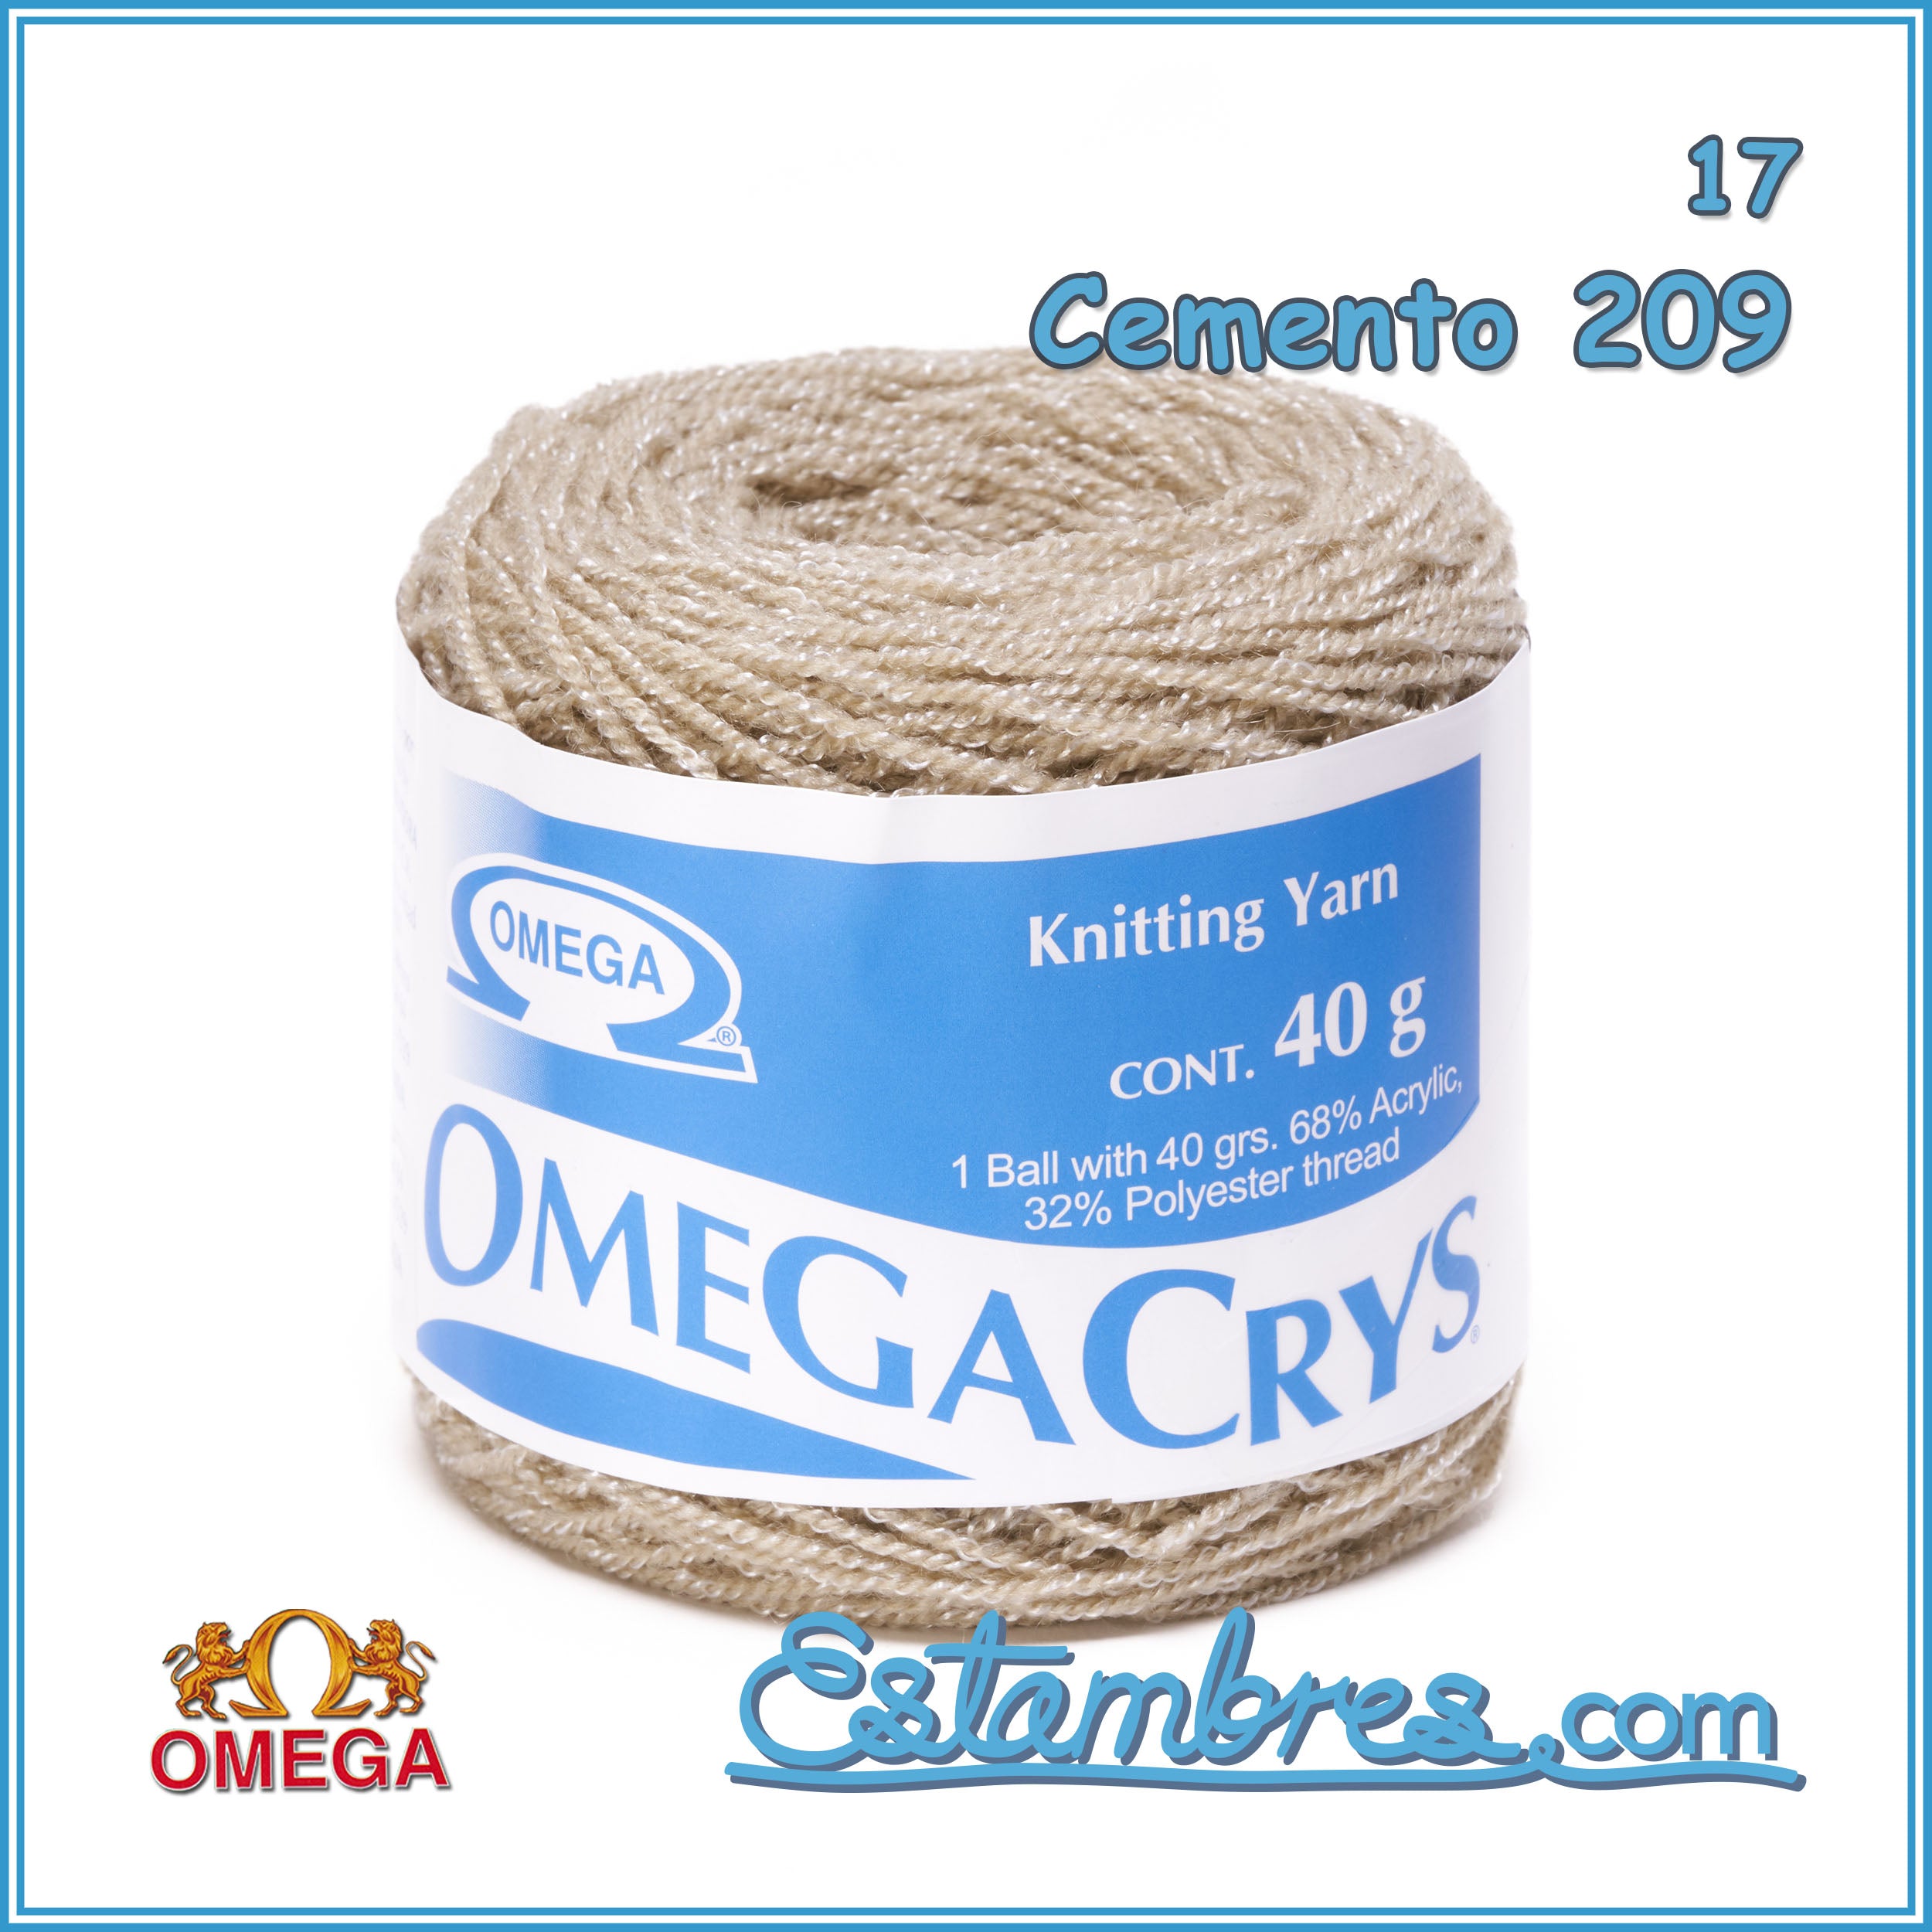 OMEGACRYS [100grs] 1 of 2 